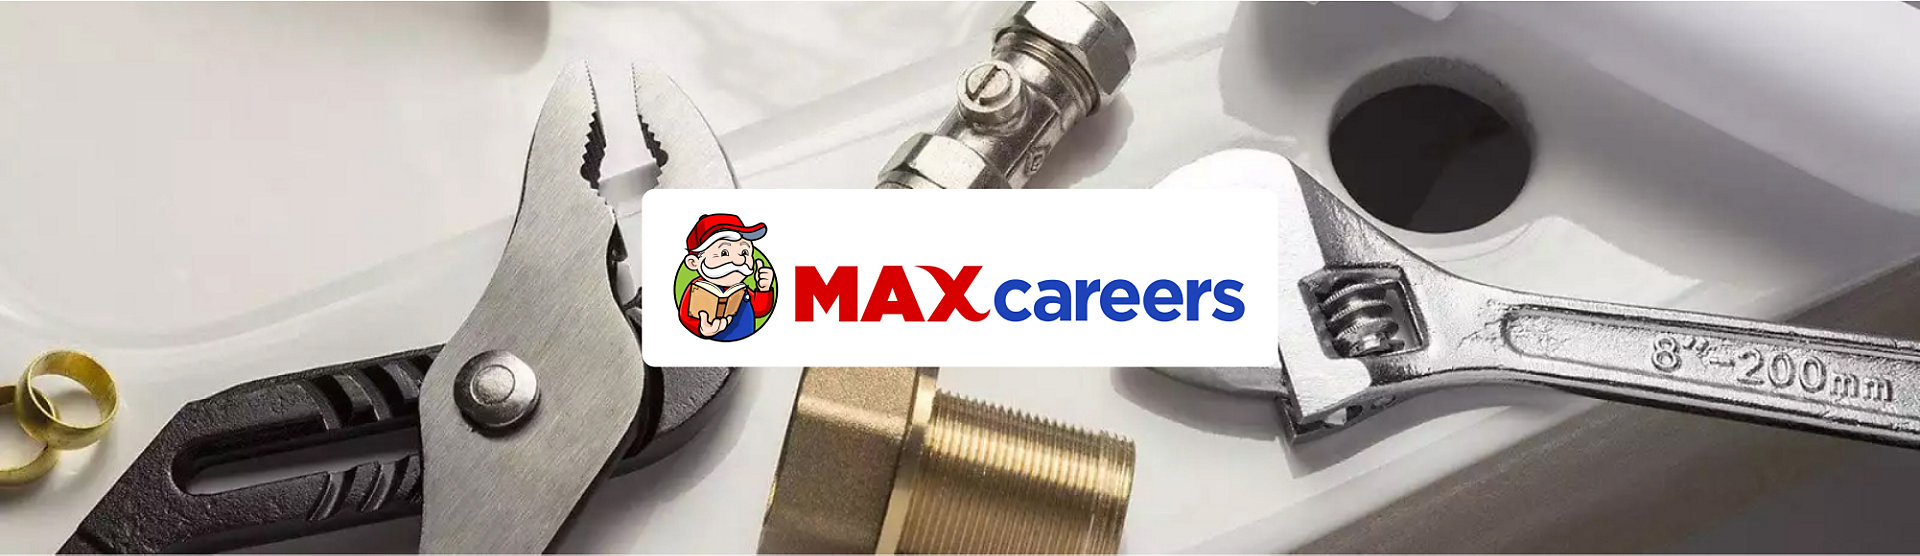 Max Careers Logo with Tools on a Sink Image in Background